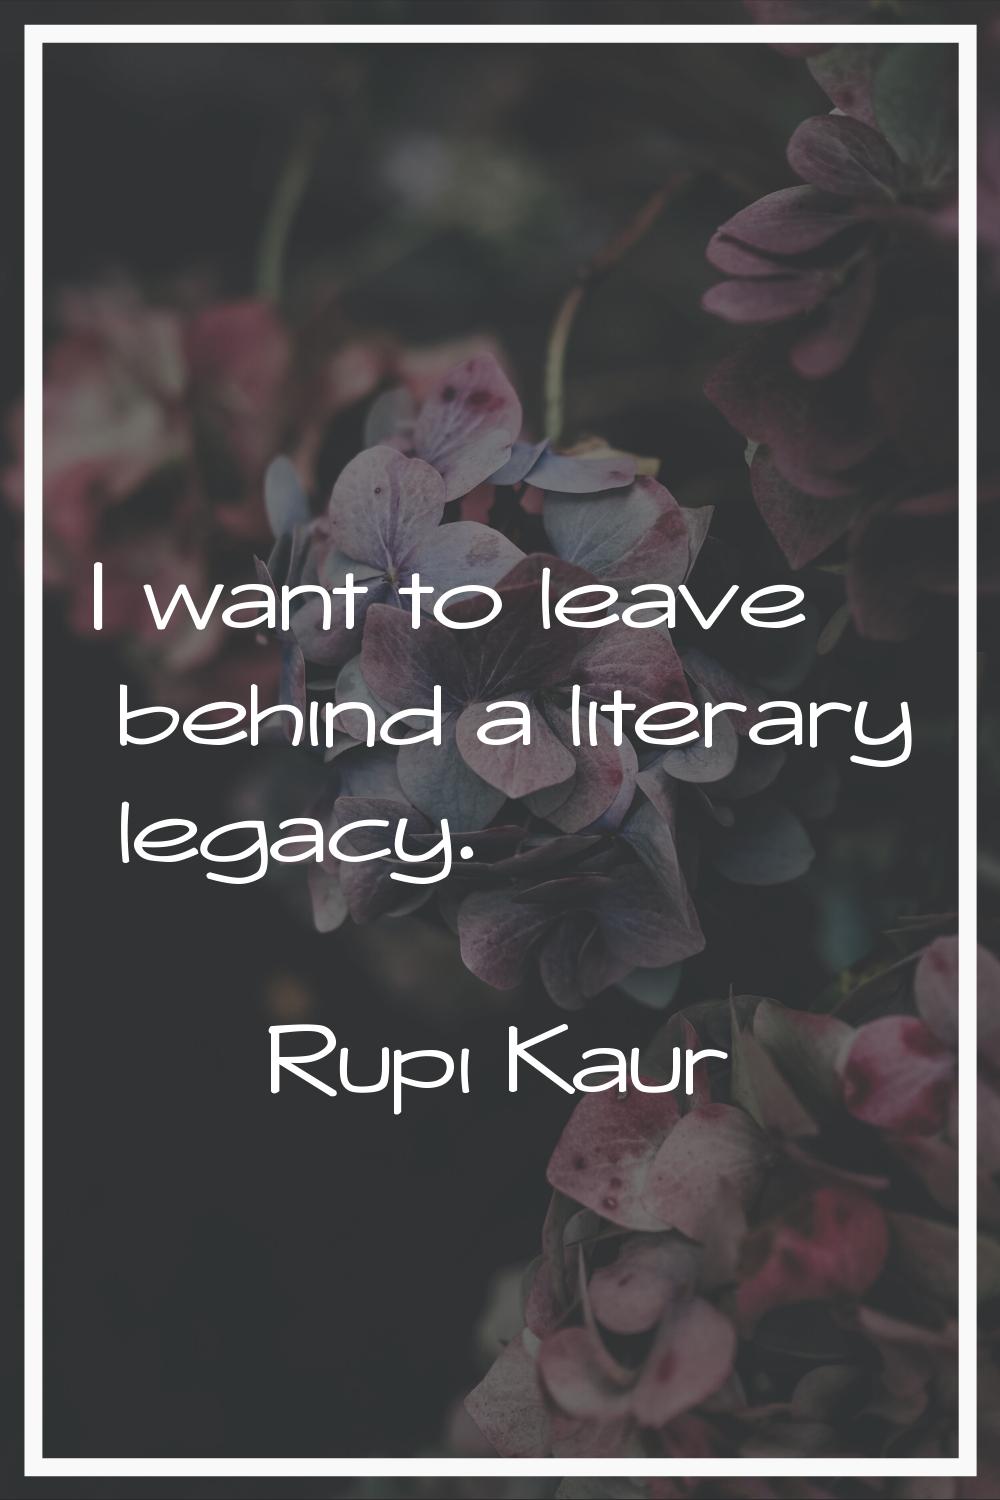 I want to leave behind a literary legacy.